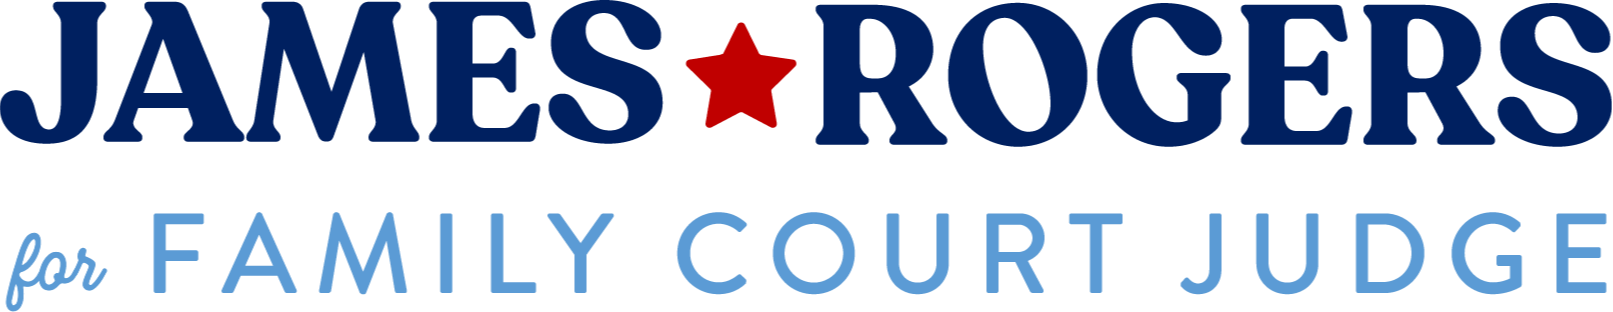 The Committee to Elect James Rogers logo